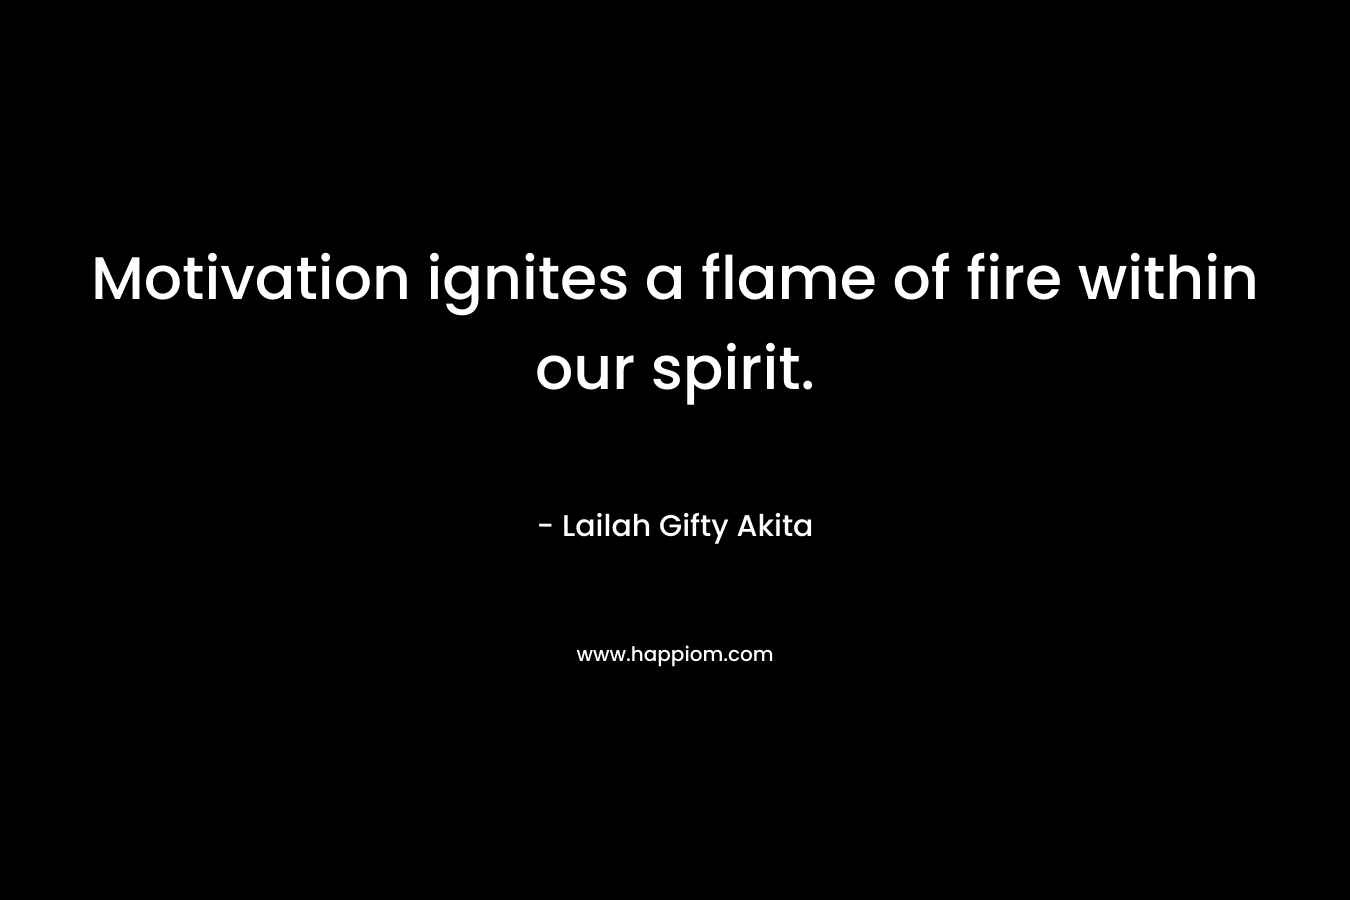 Motivation ignites a flame of fire within our spirit.